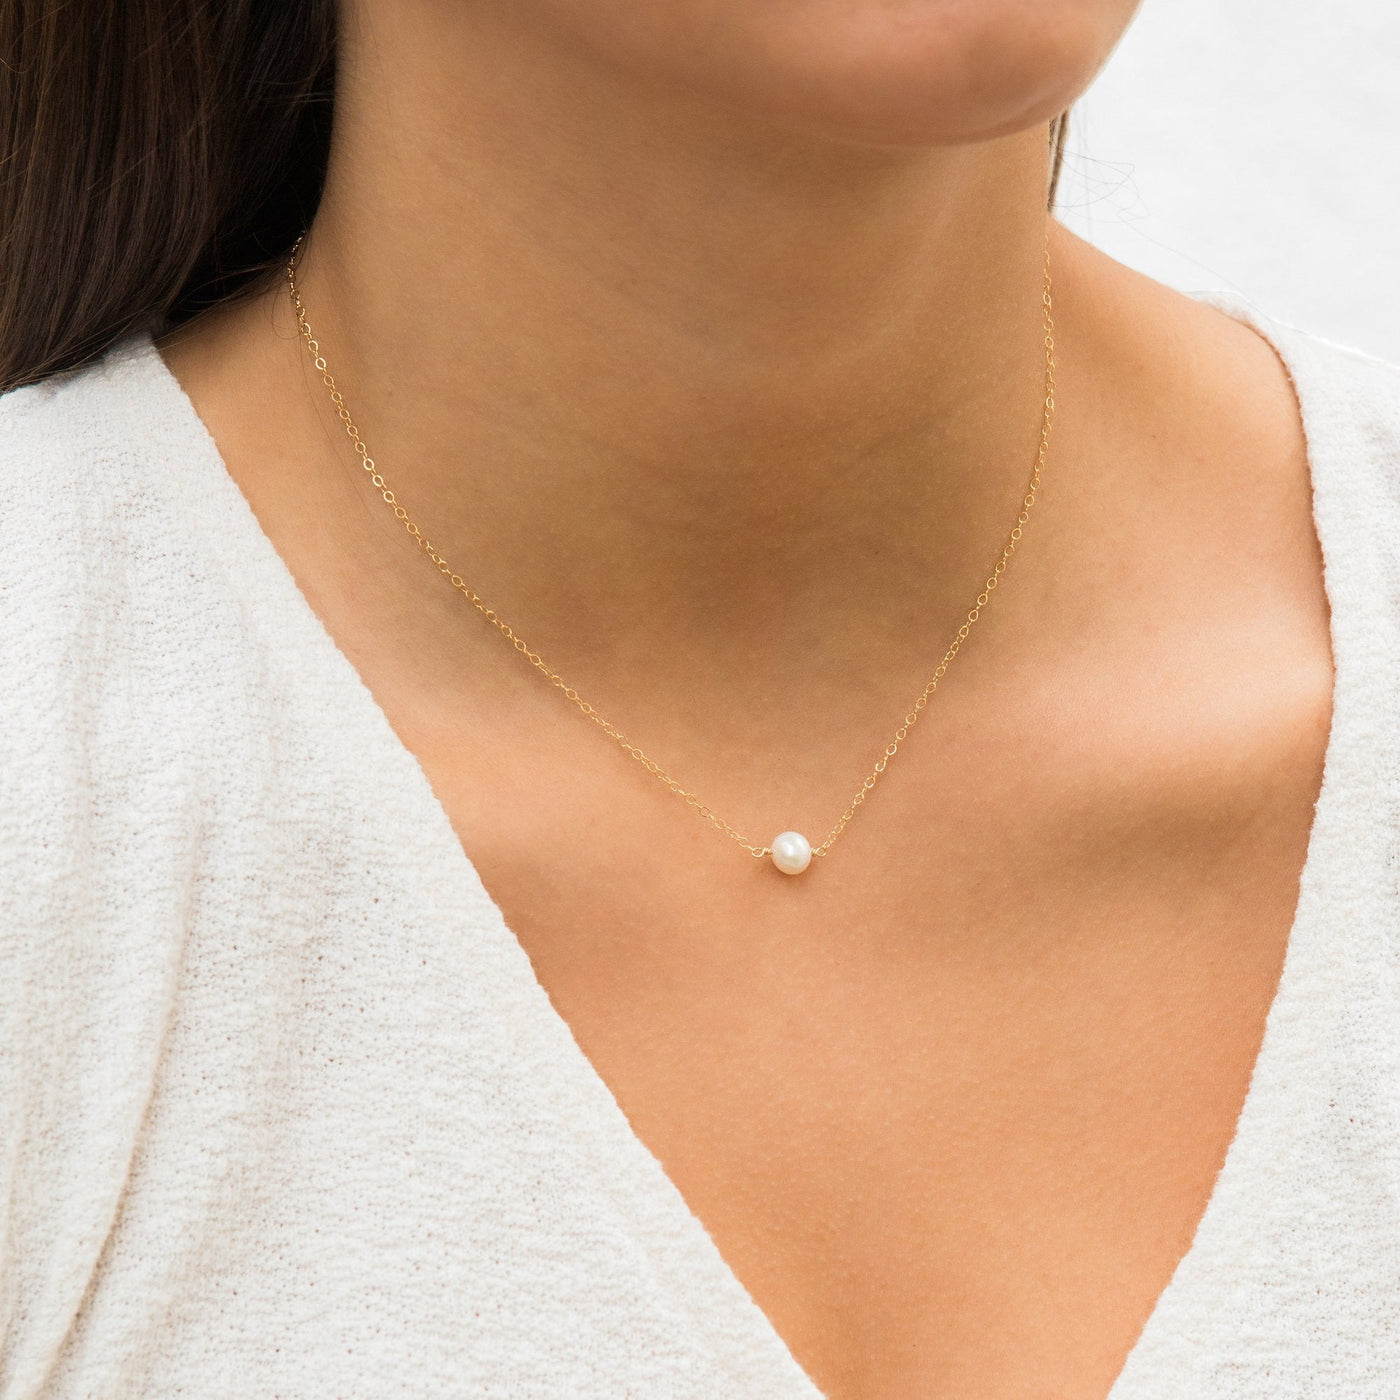 Large Freshwater Pearl Necklace | Simple & Dainty Jewelry